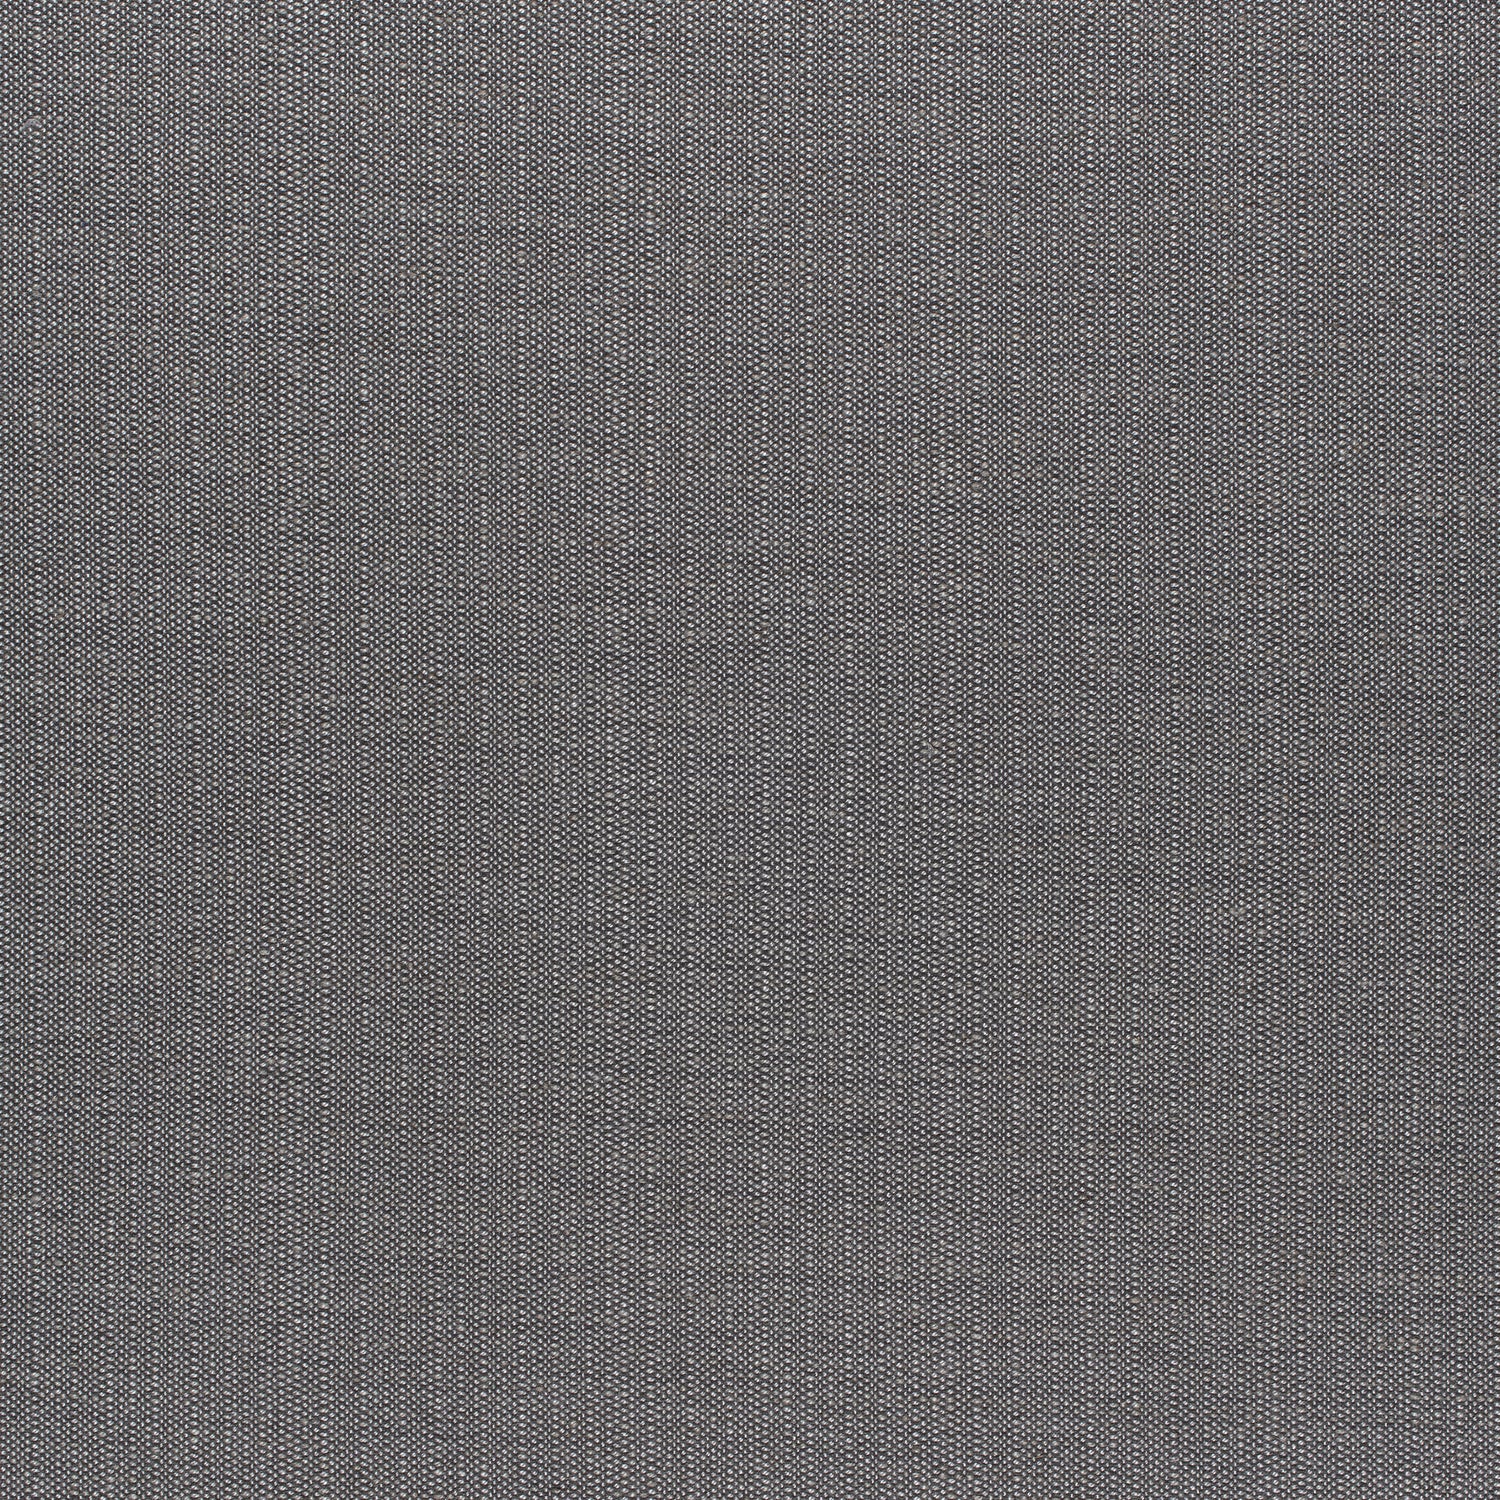 Brooks fabric in charcoal color - pattern number W73373 - by Thibaut in the Nomad collection